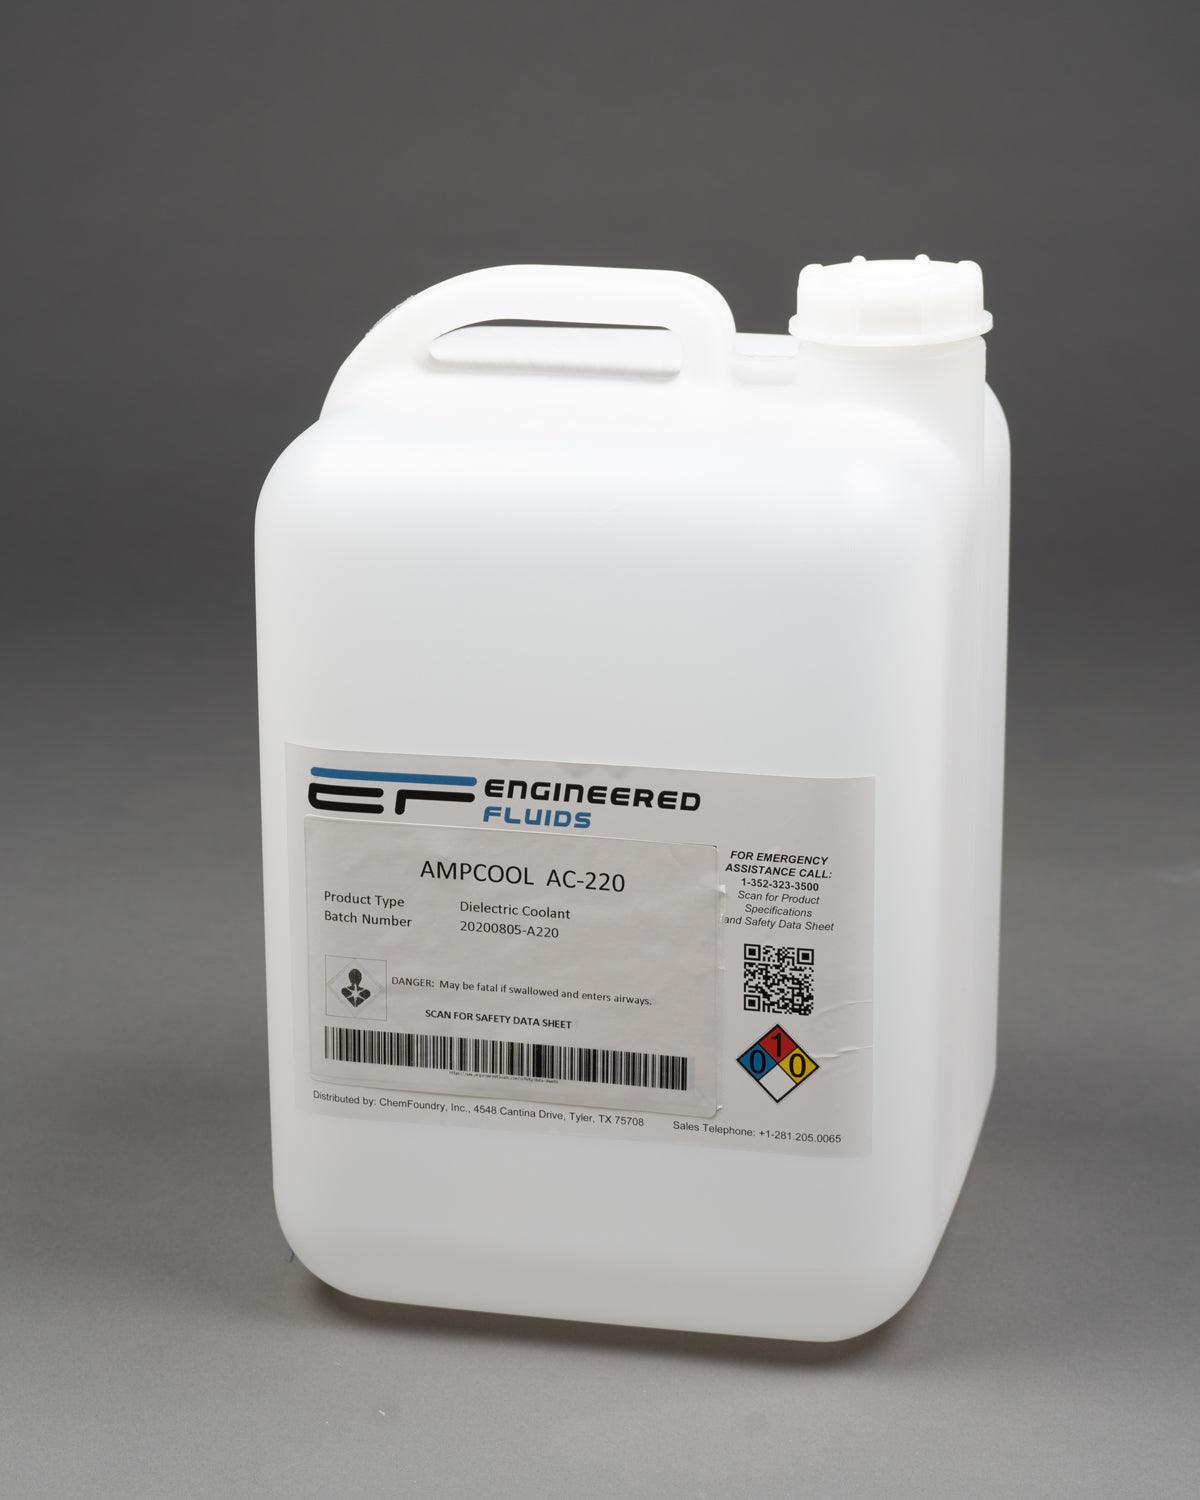 AmpCool® AC-220 Dielectric Coolant & Lubricant - Engineered Fluids